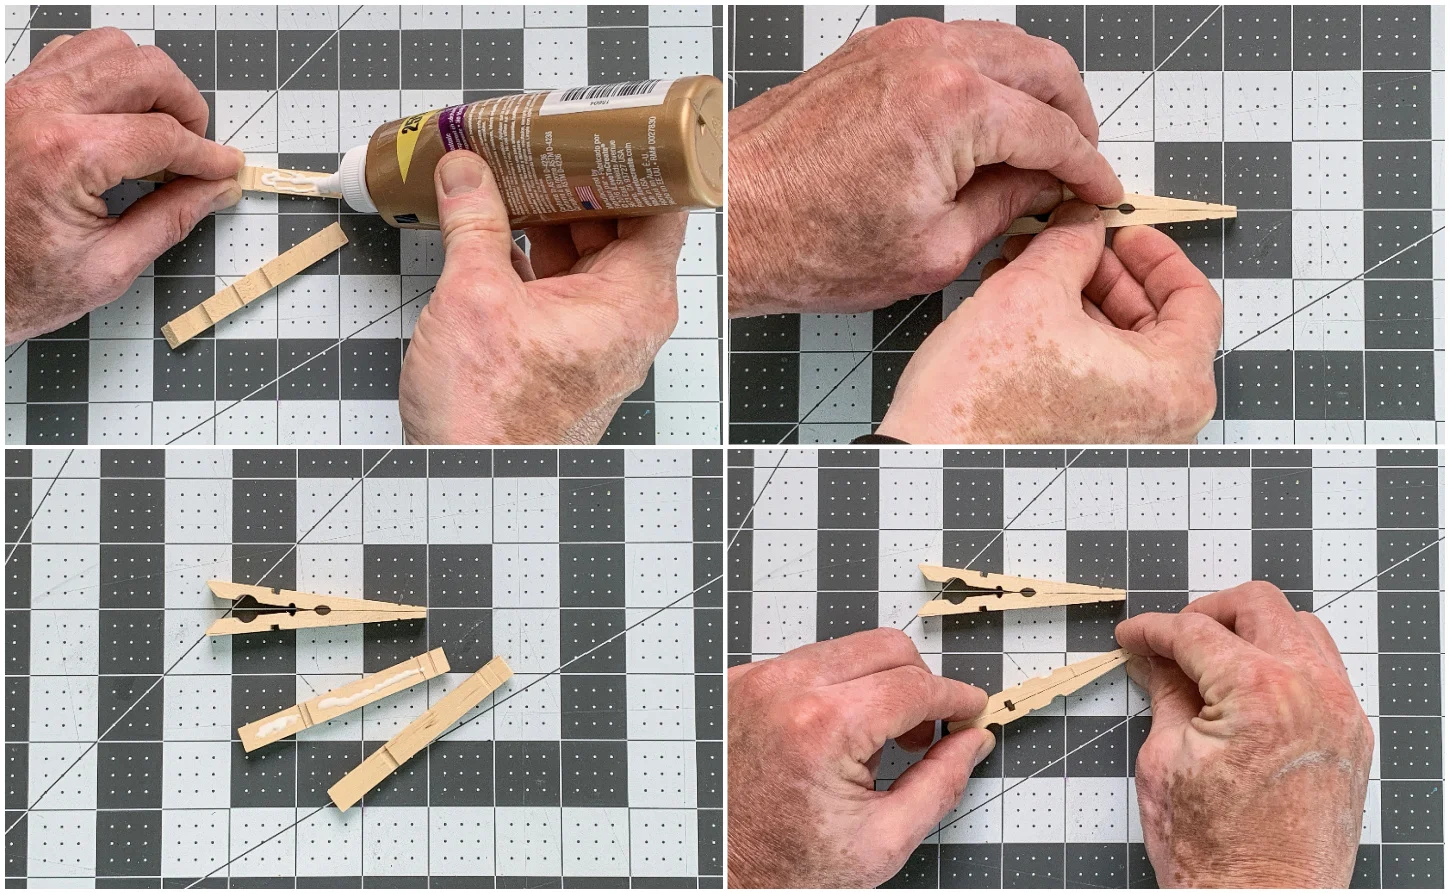 Gluing halves of clothespins together to form butterfly wings